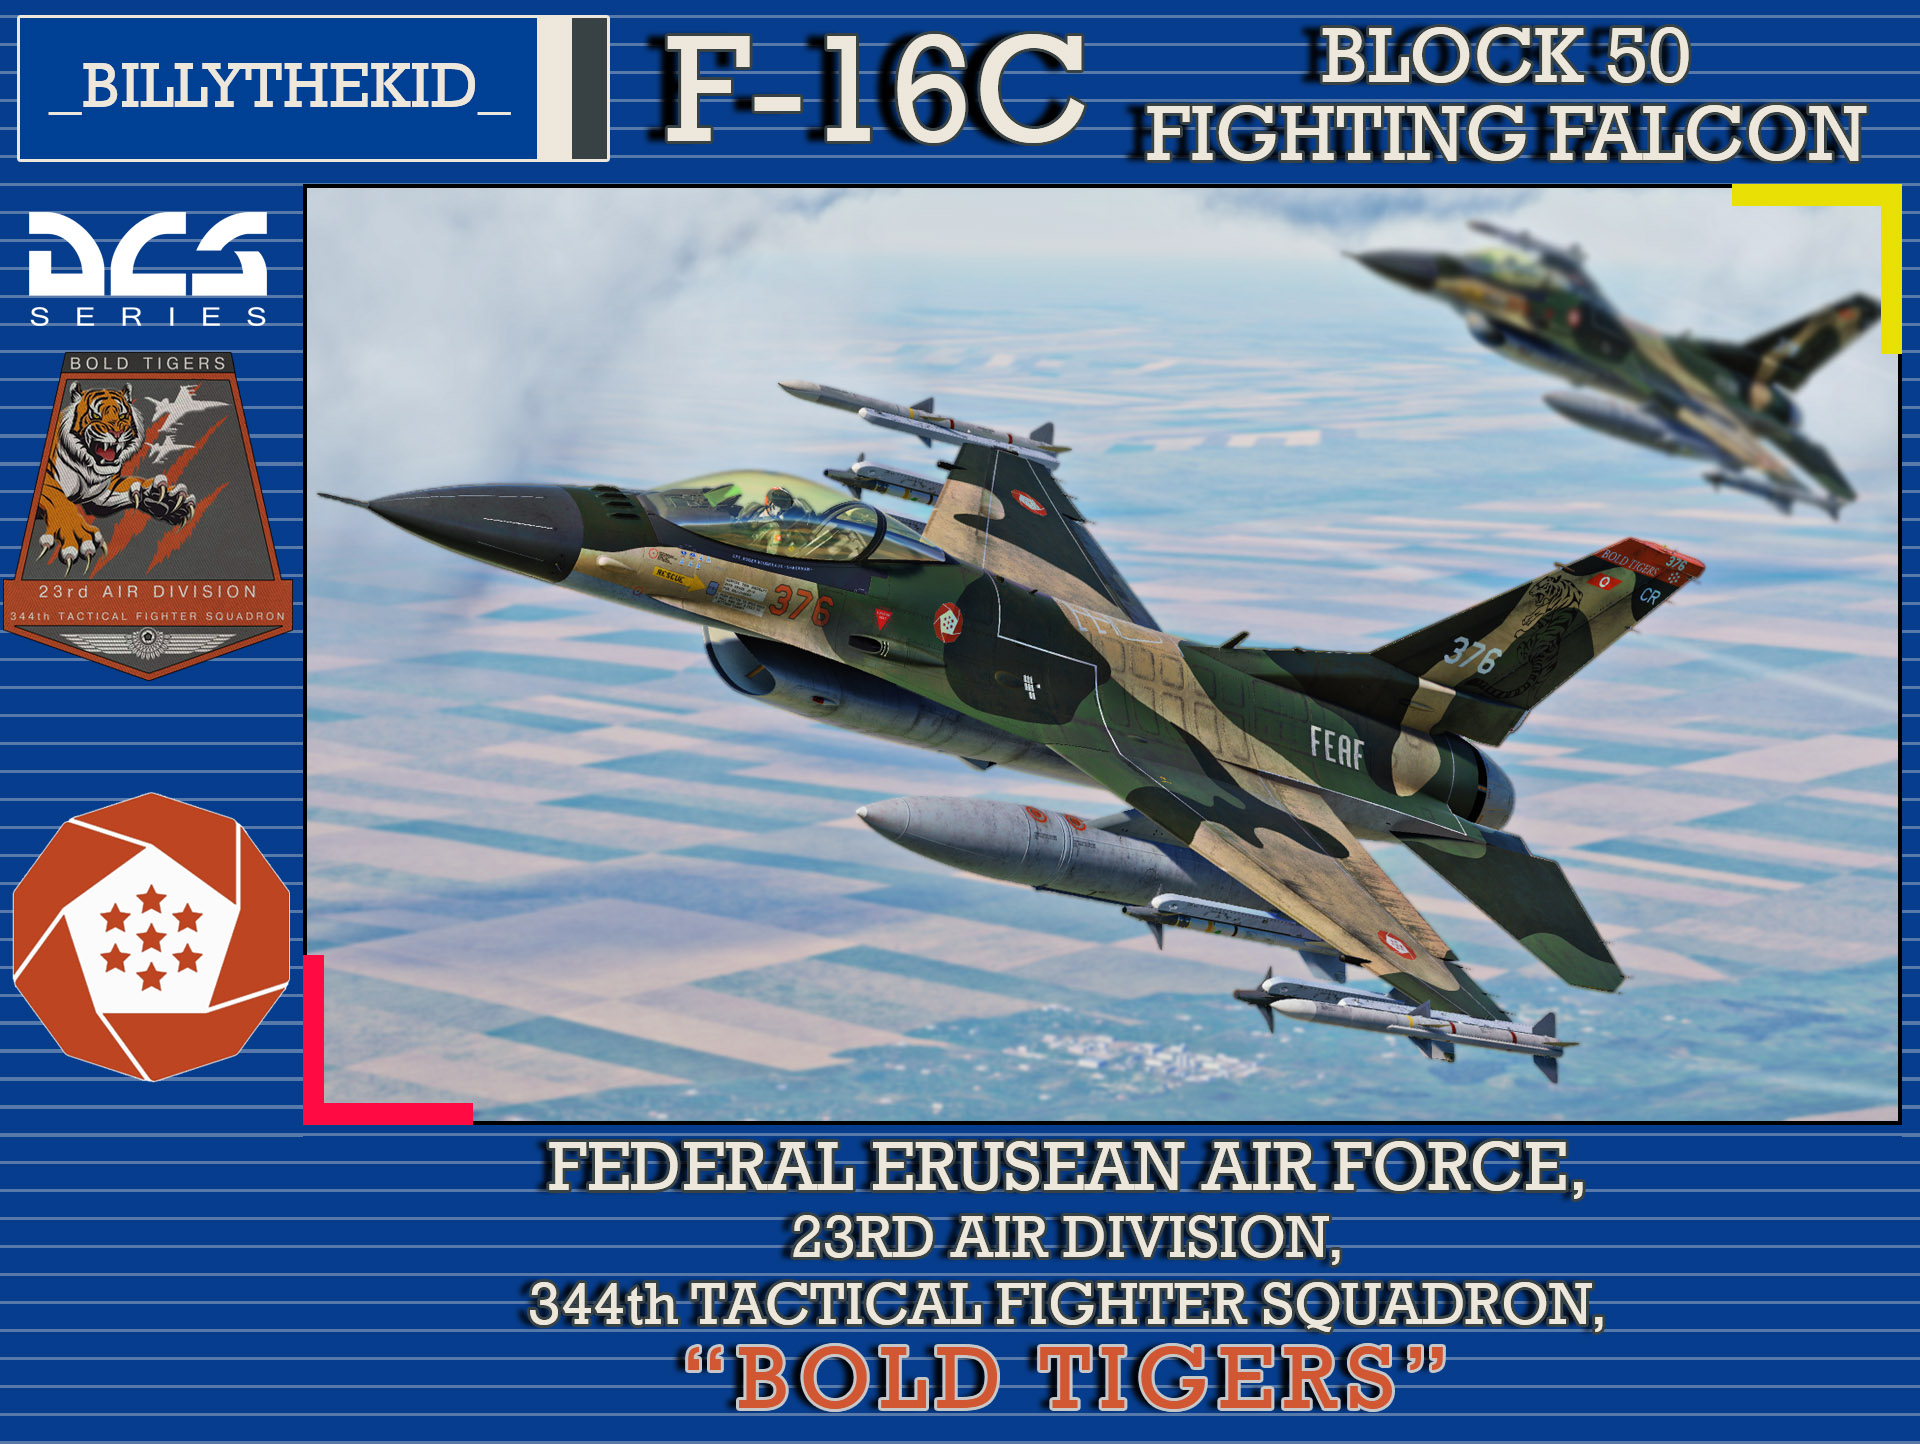 Ace Combat - Federal Erusean Air Force 23rd Air Division, 344th Tactical Fighter Squadron "Bold Tigers" F-16C Block 50 Fighting Falcon